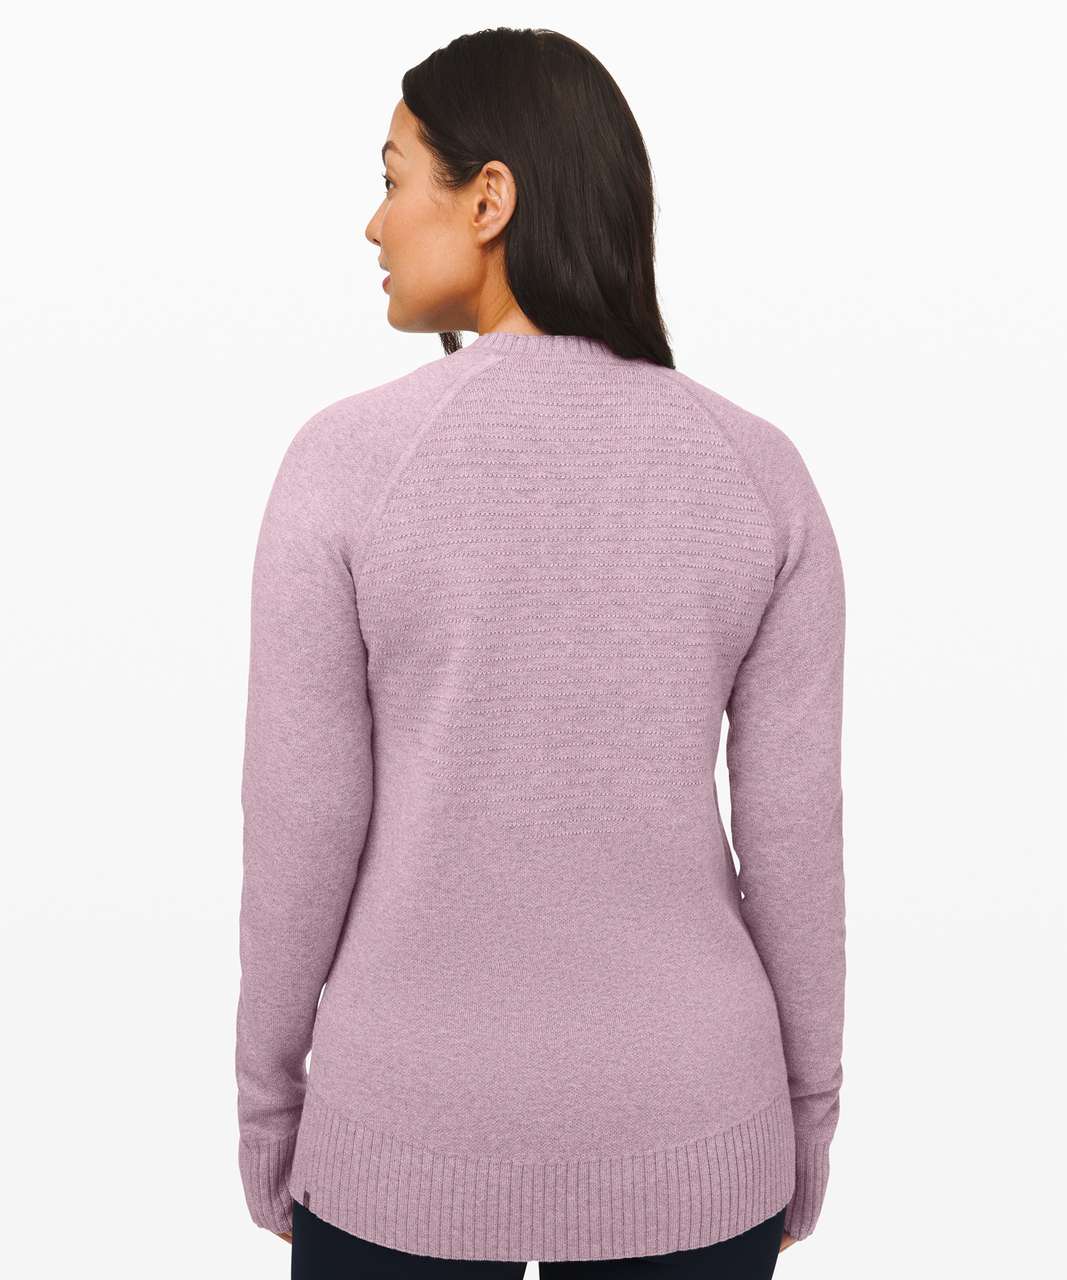 Lululemon Still Lotus Sweater *Reversible - Heathered Frosted Mulberry / Heathered Silver Lilac / Heathered Frosted Mulberry